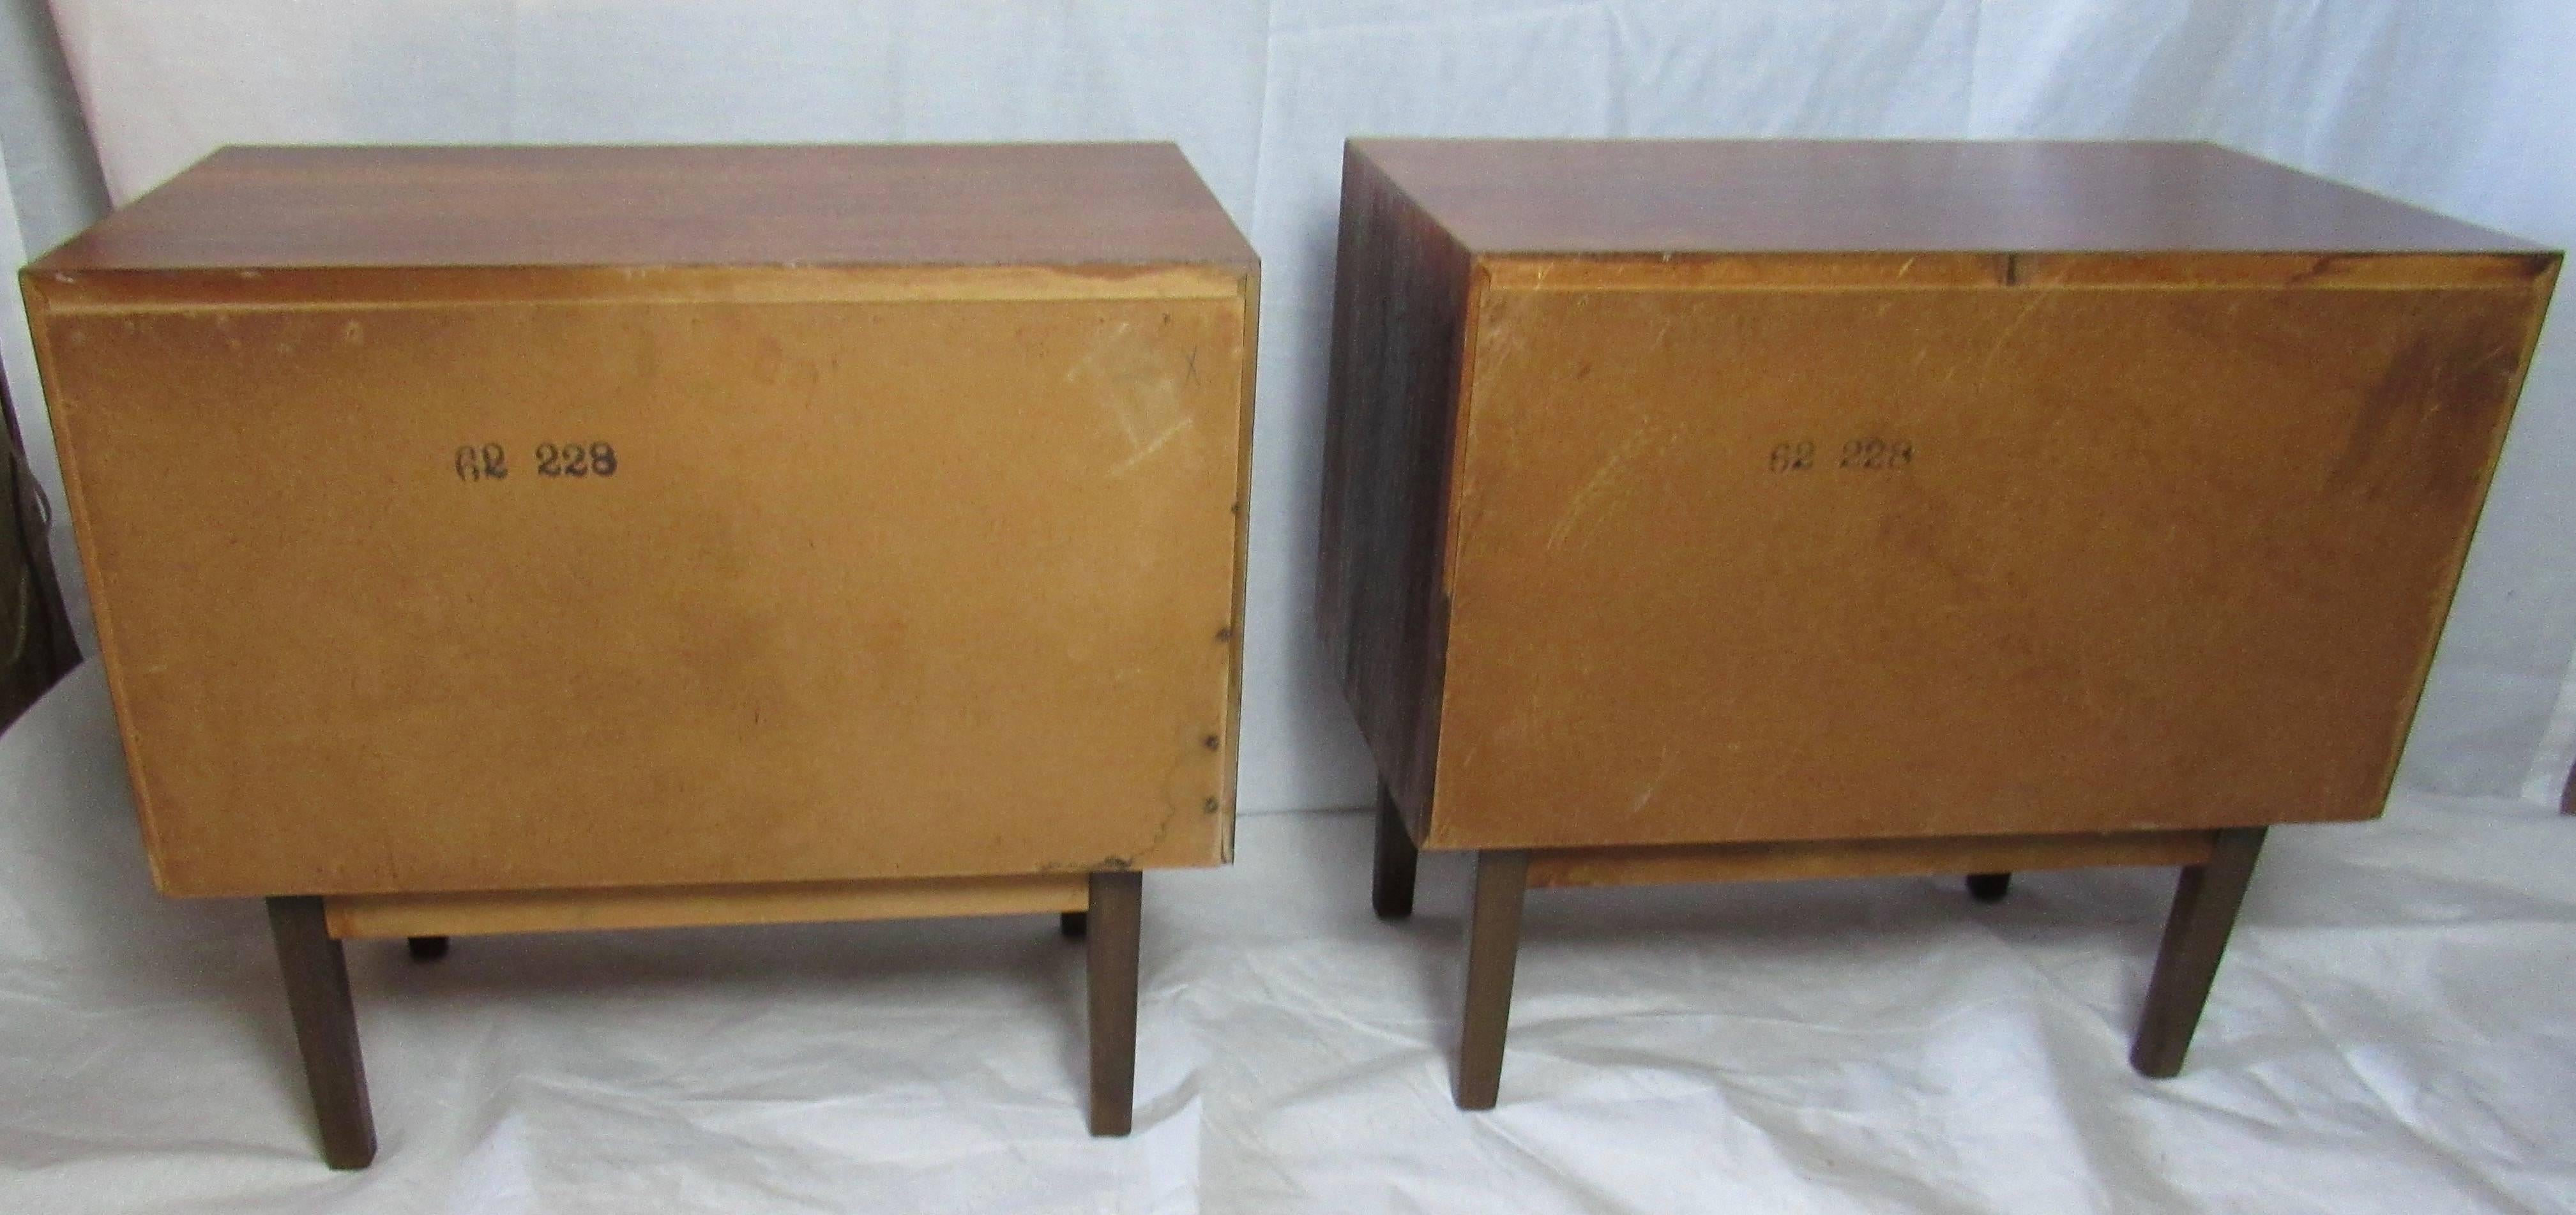 Mid-20th Century Walnut and Rosewood Nightstands by H. Paul Browning for Stanley Furniture Co.